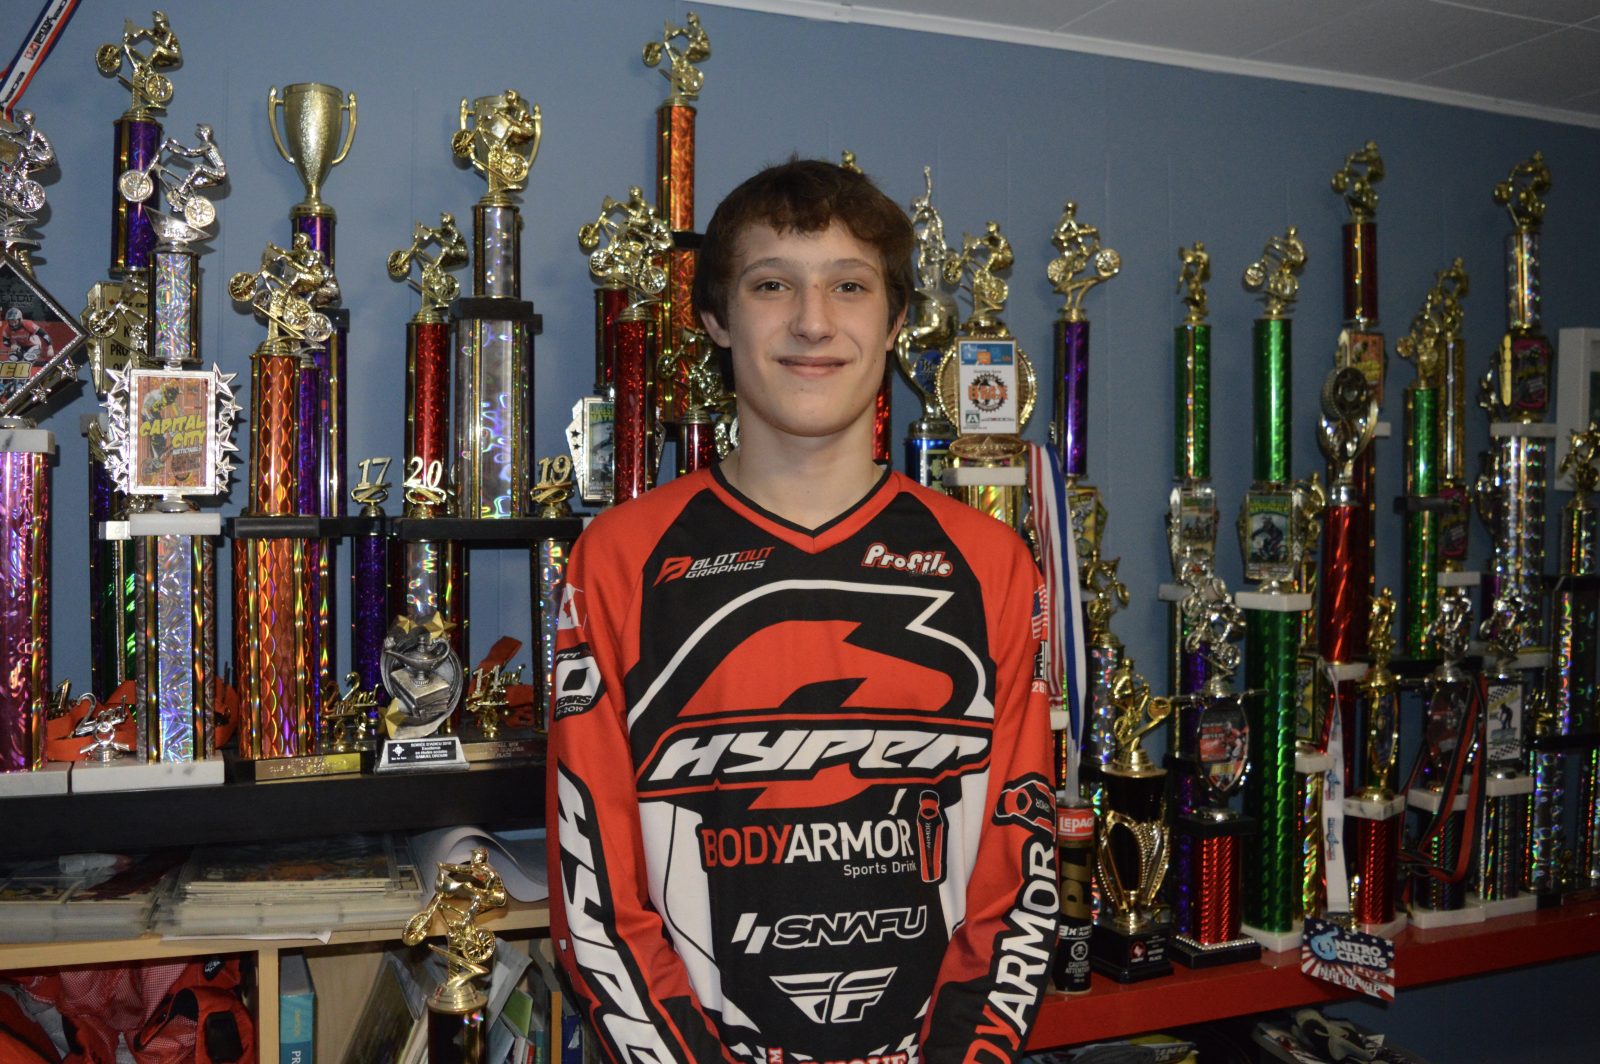 Local athlete qualifies for BMX World Championships